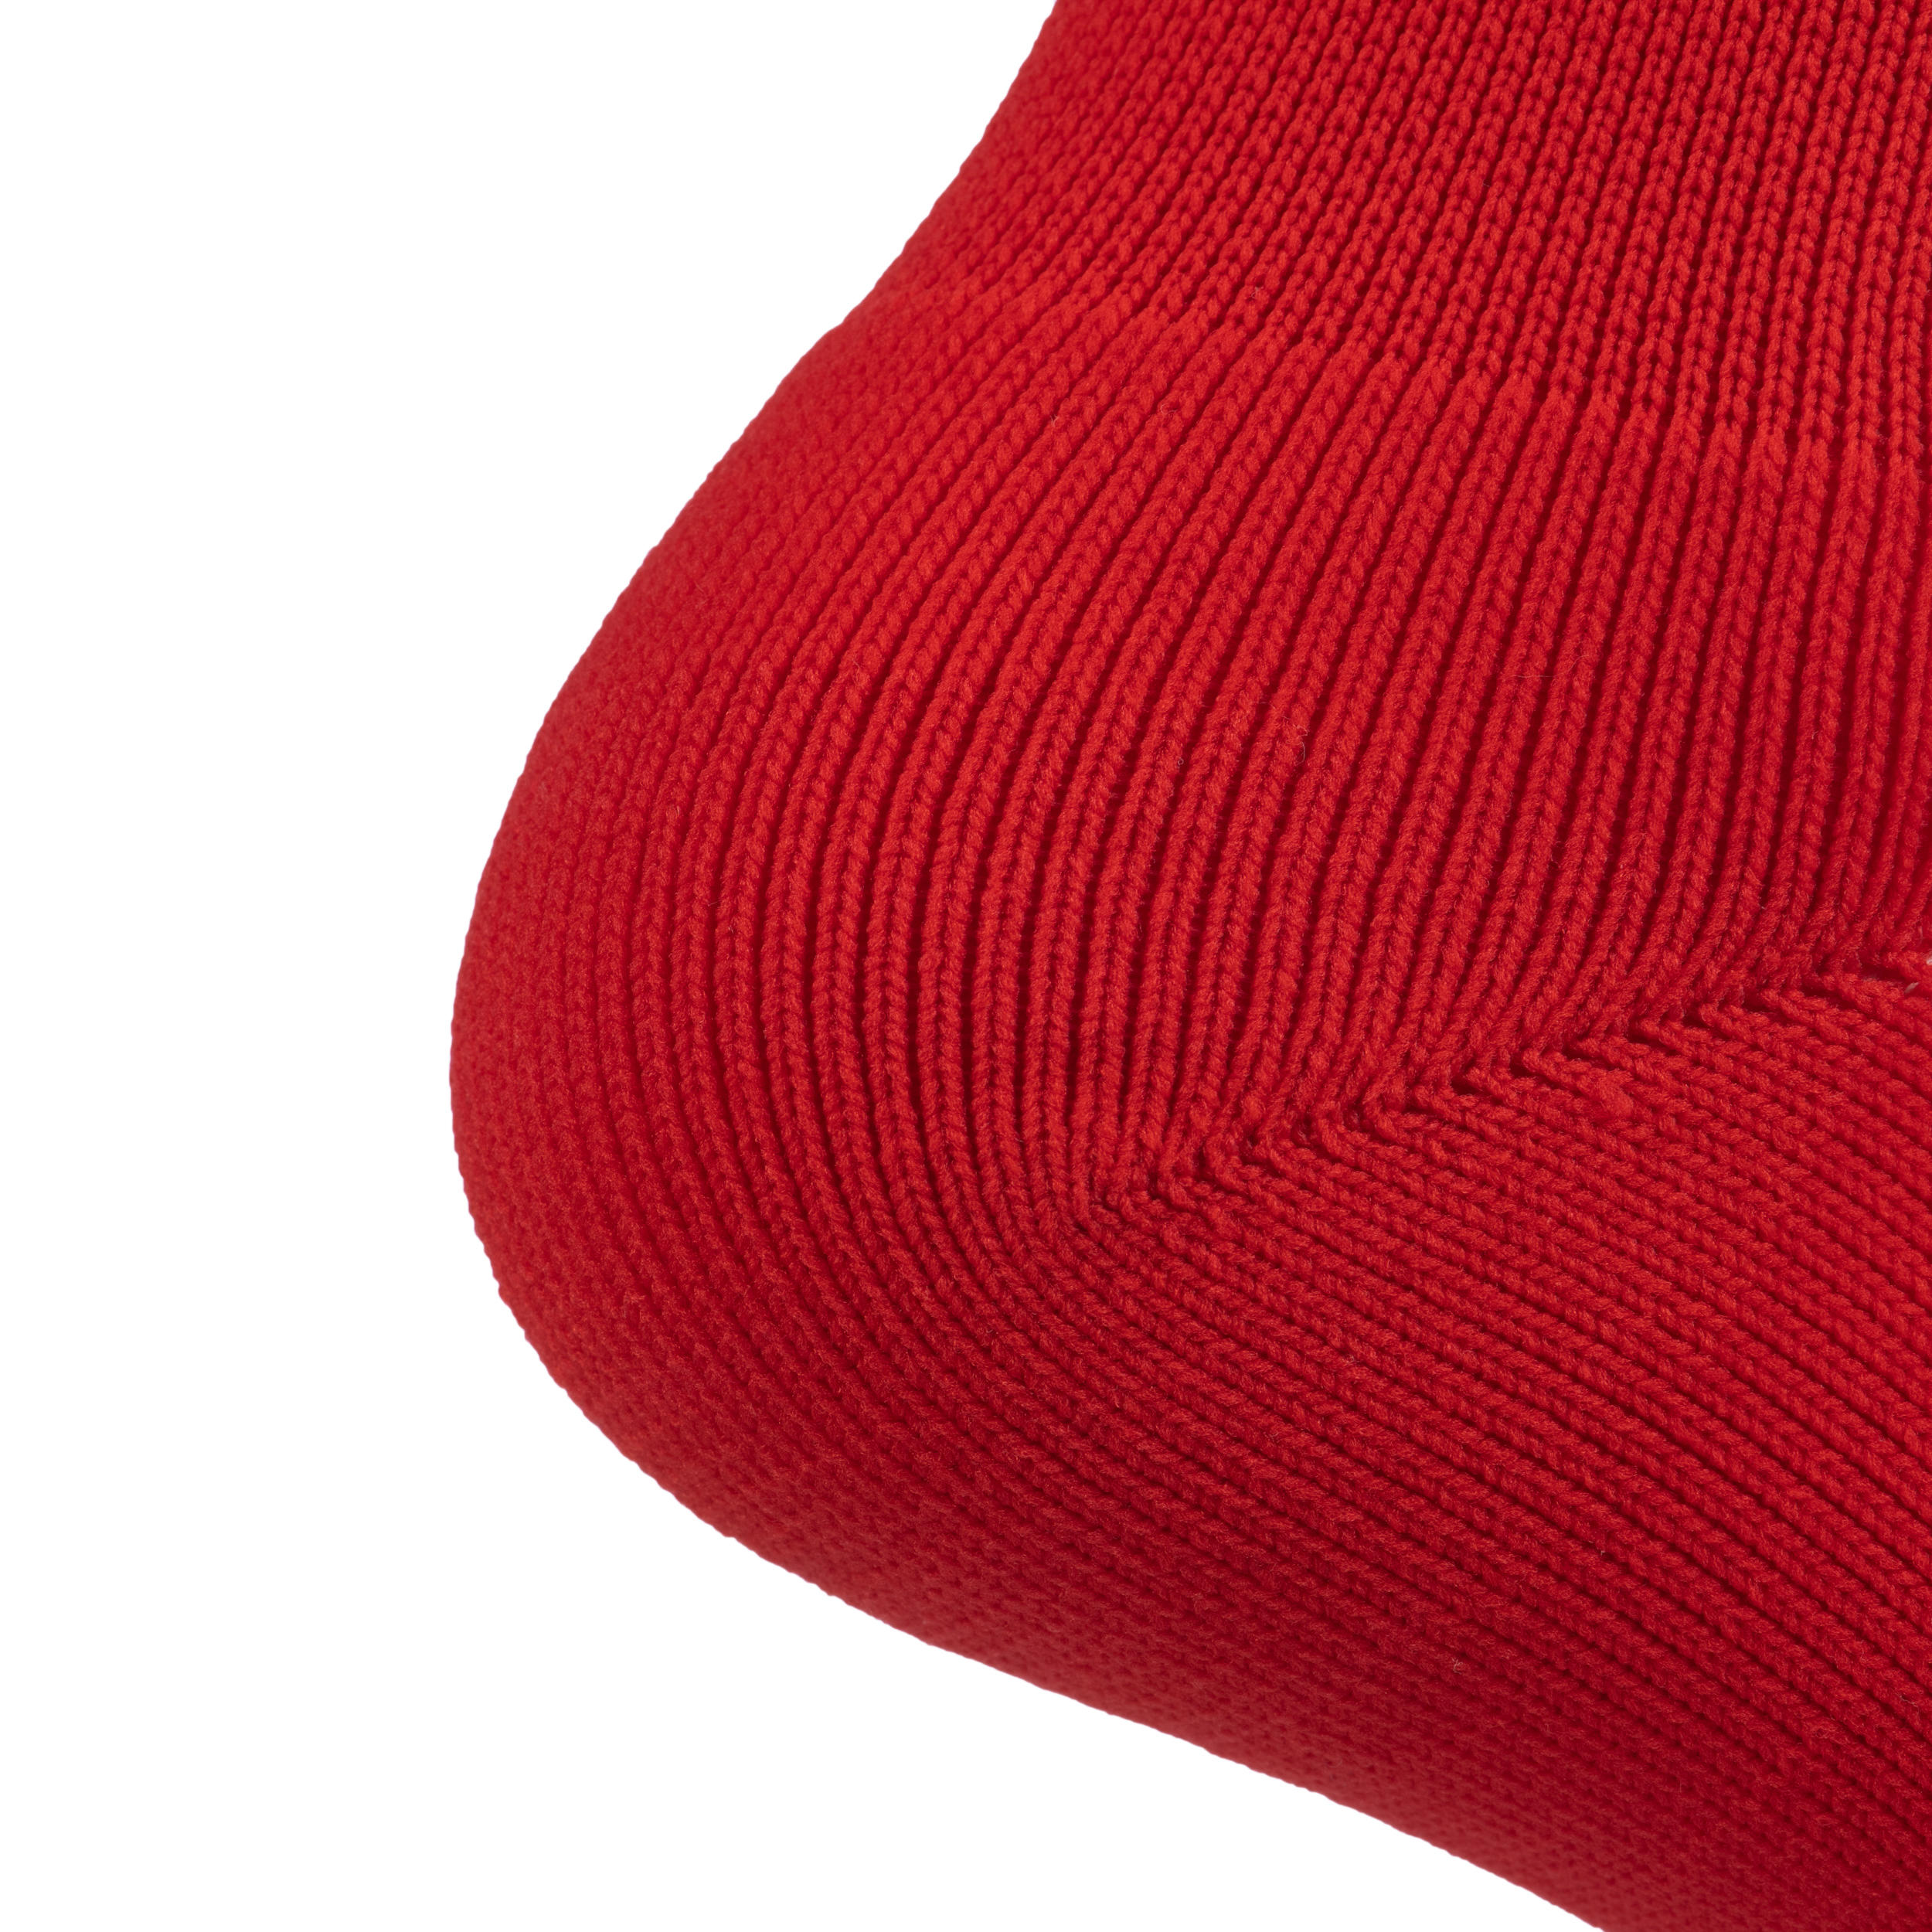 Men's/Women's High Rugby Socks R500 - Red/Yellow 3/5